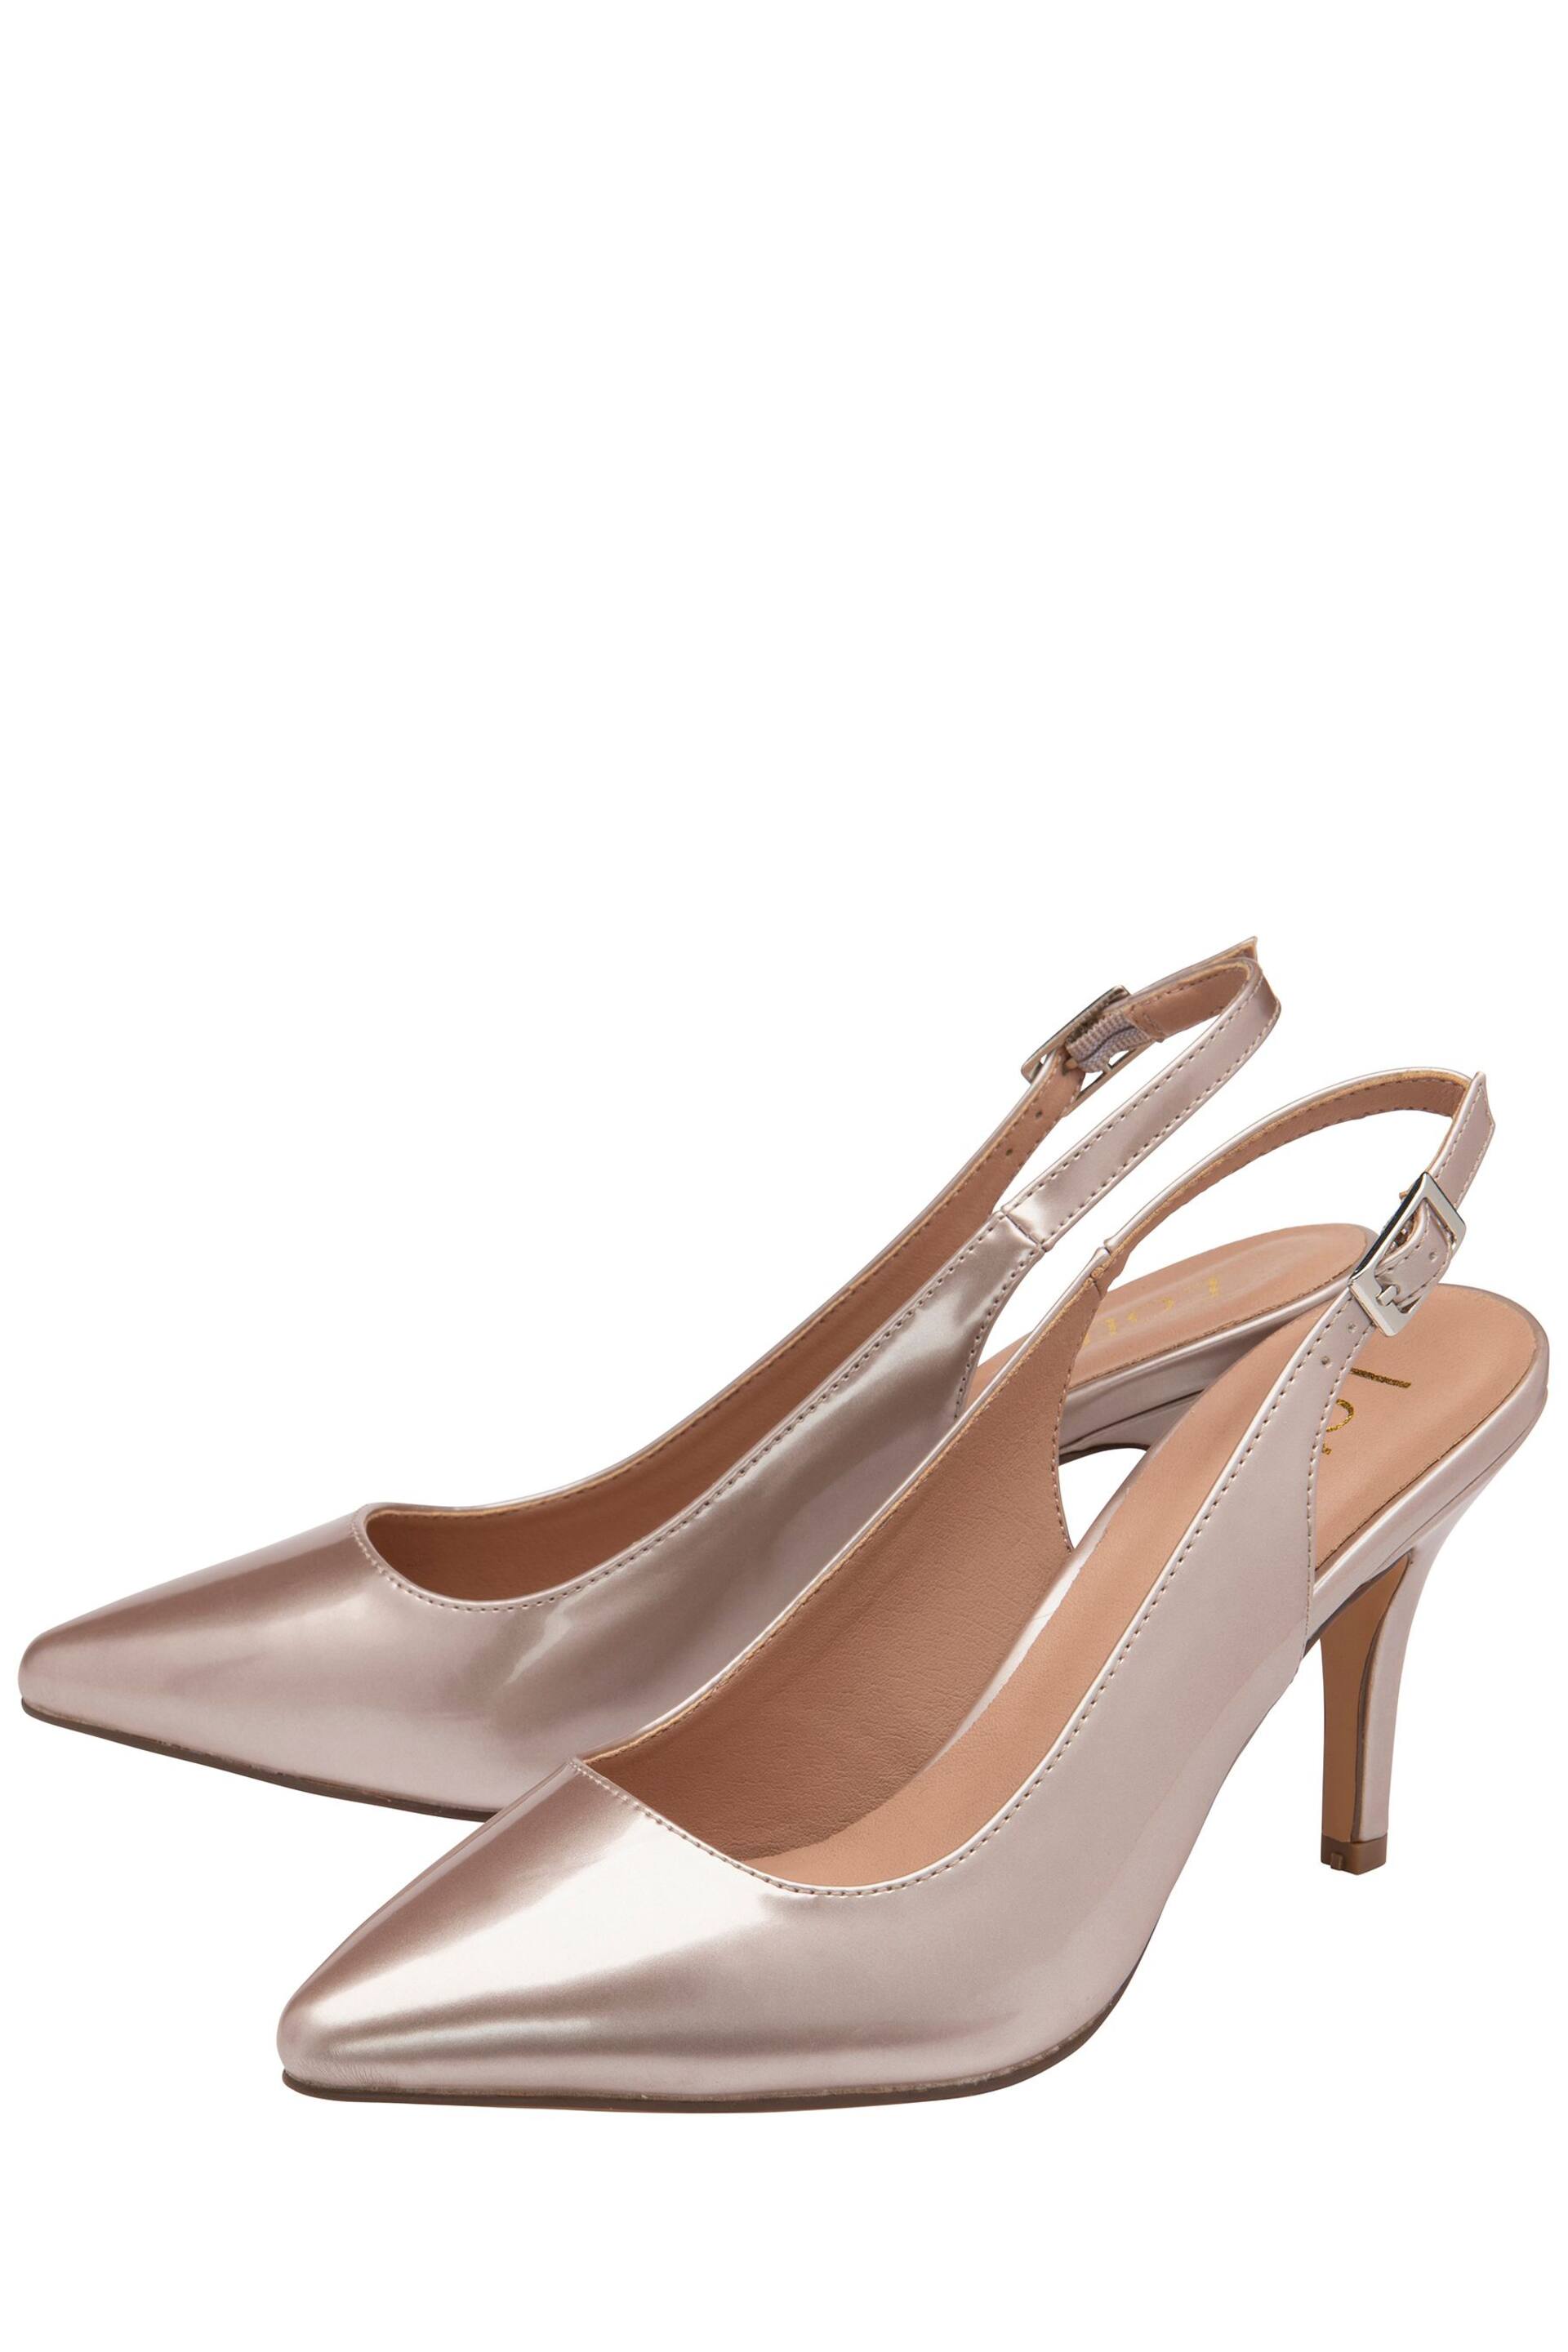 Lotus Pink Slingback Court Shoes - Image 2 of 4